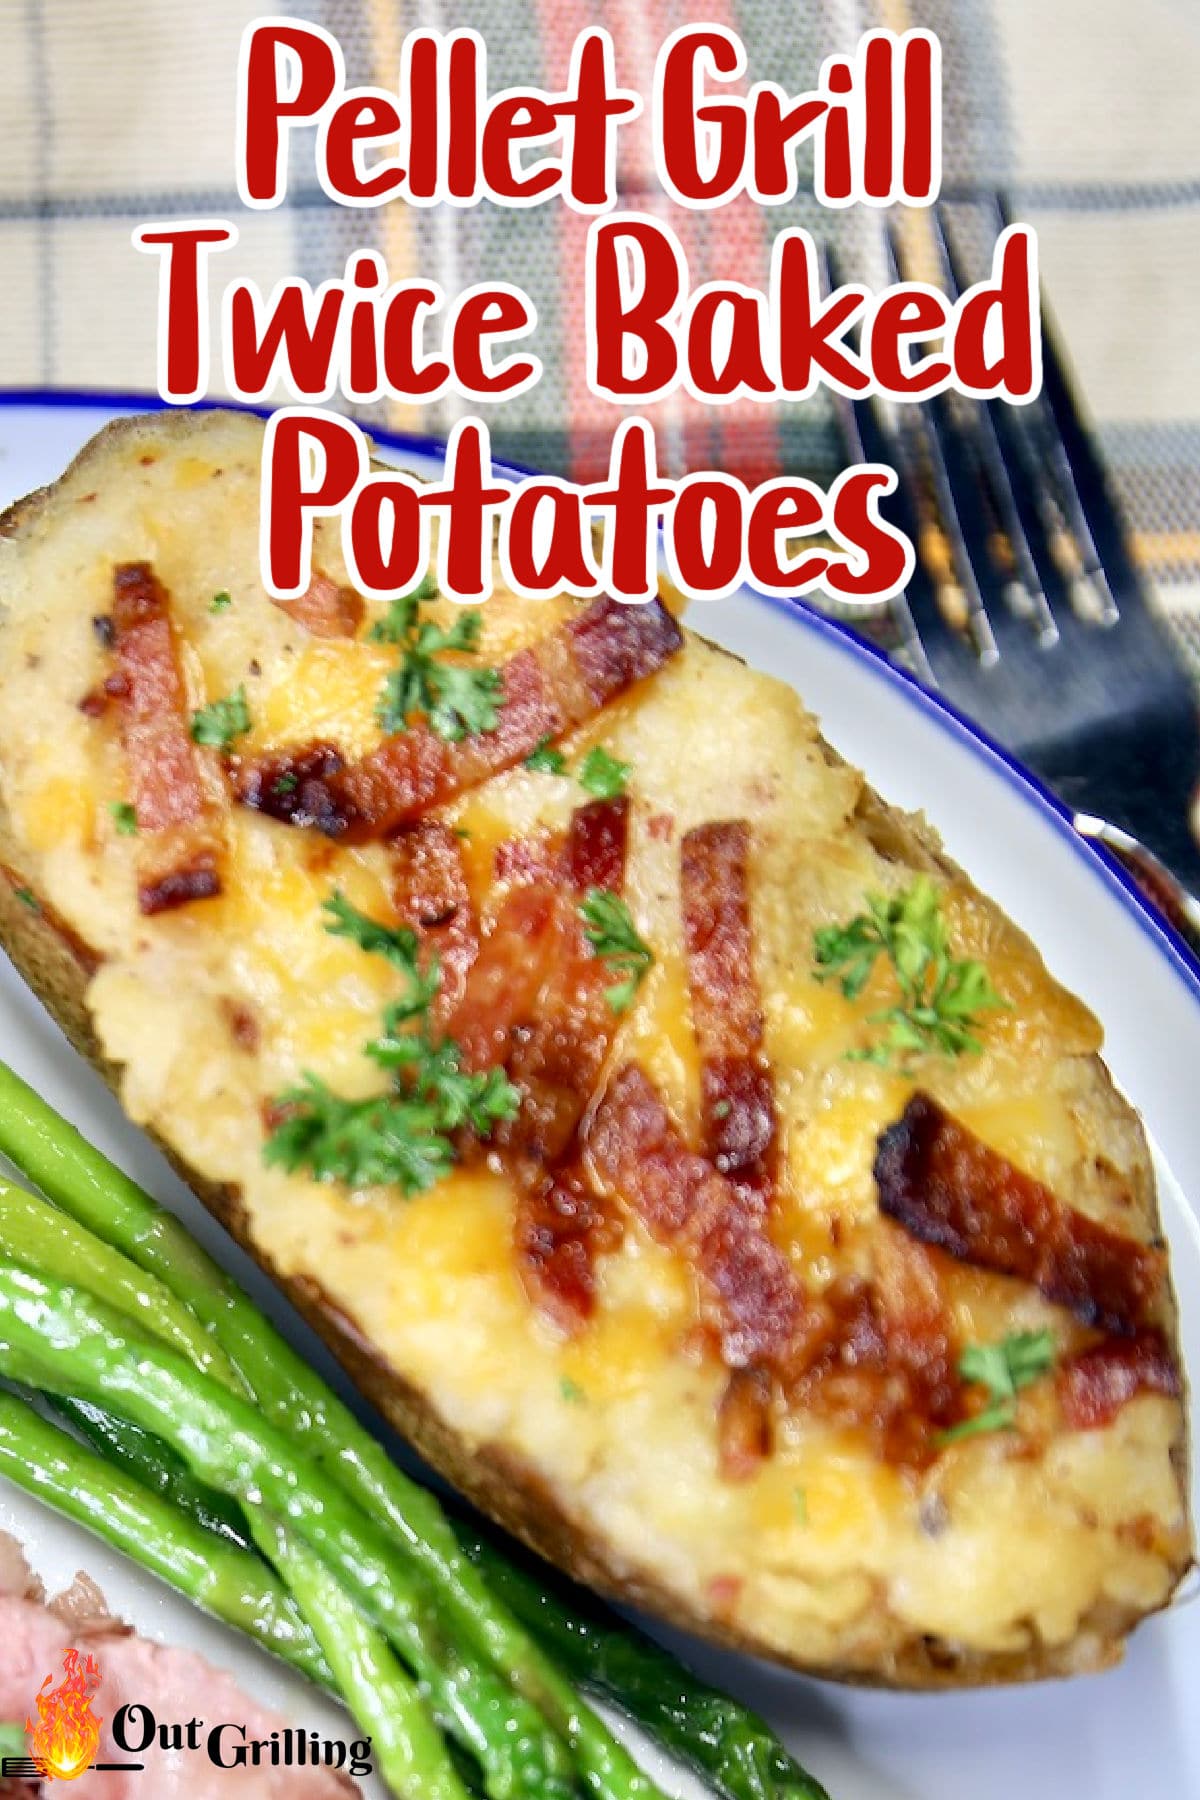 Pellet Grill Twice Baked Potatoes - Out Grilling